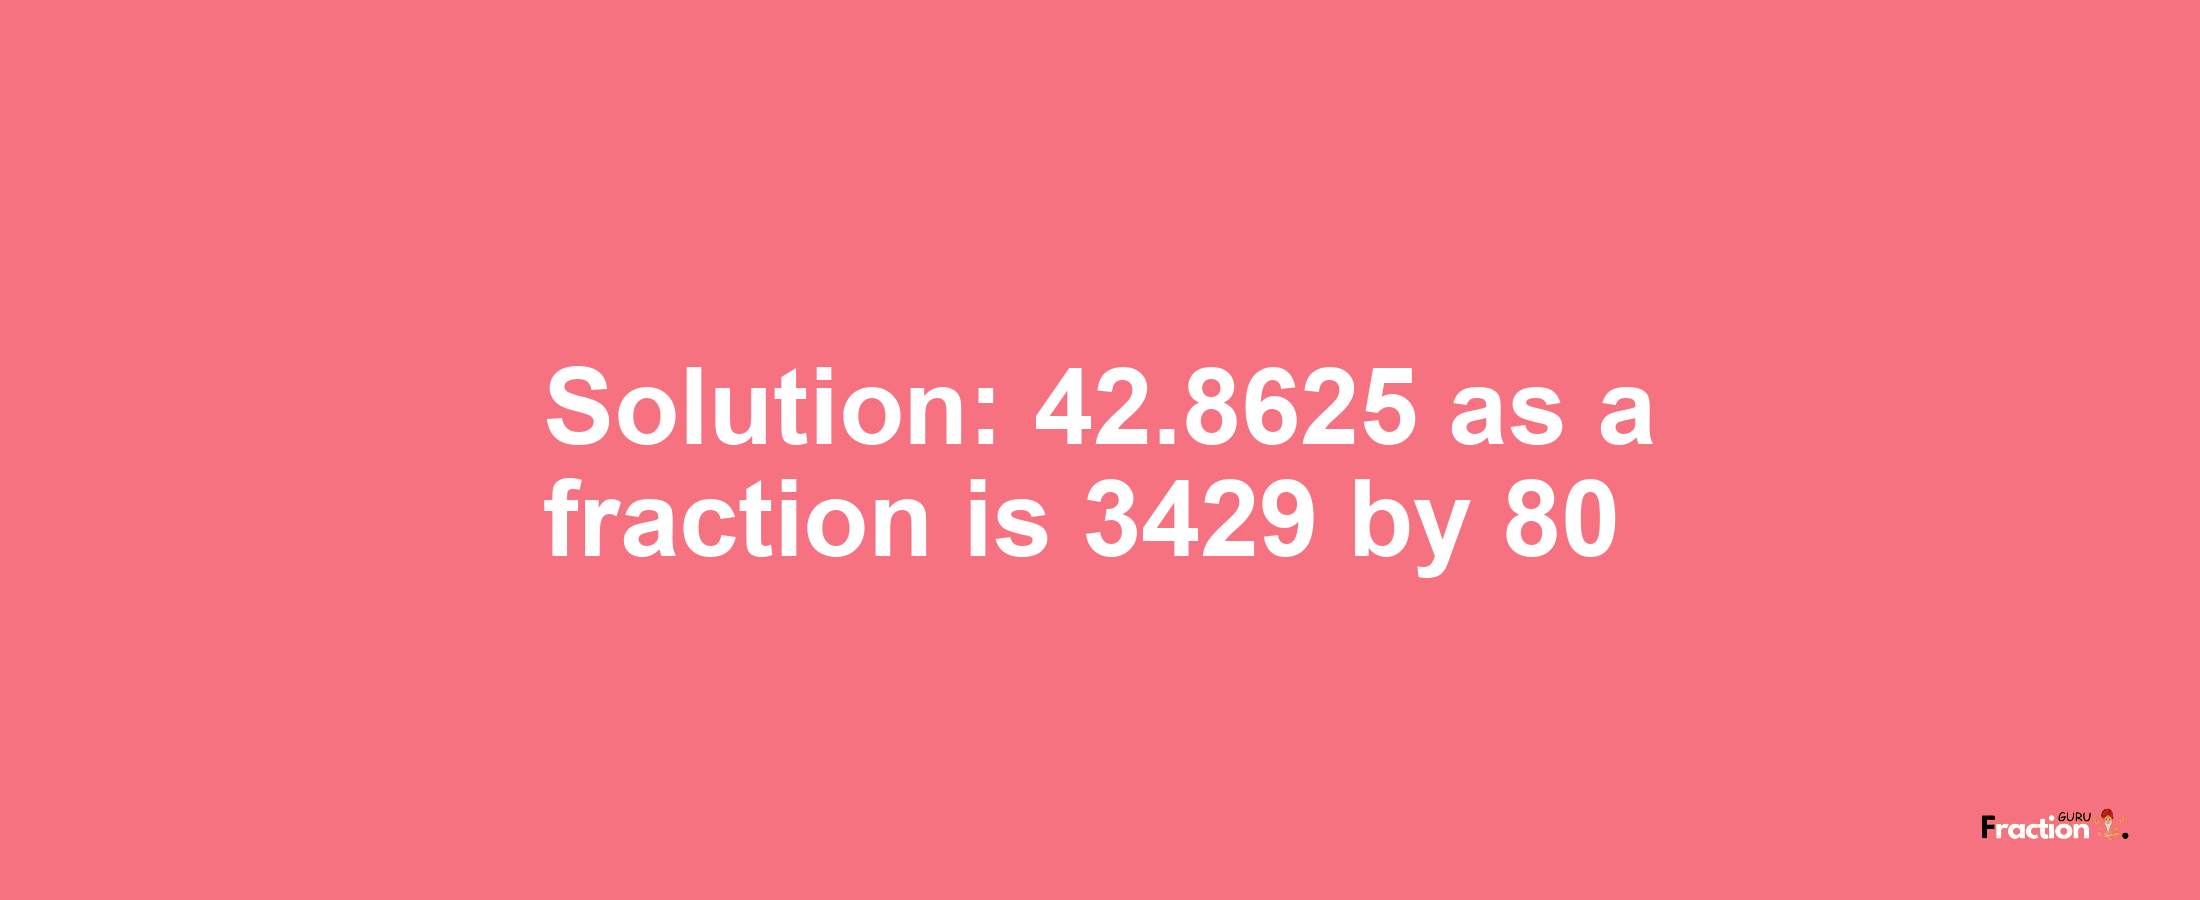 Solution:42.8625 as a fraction is 3429/80